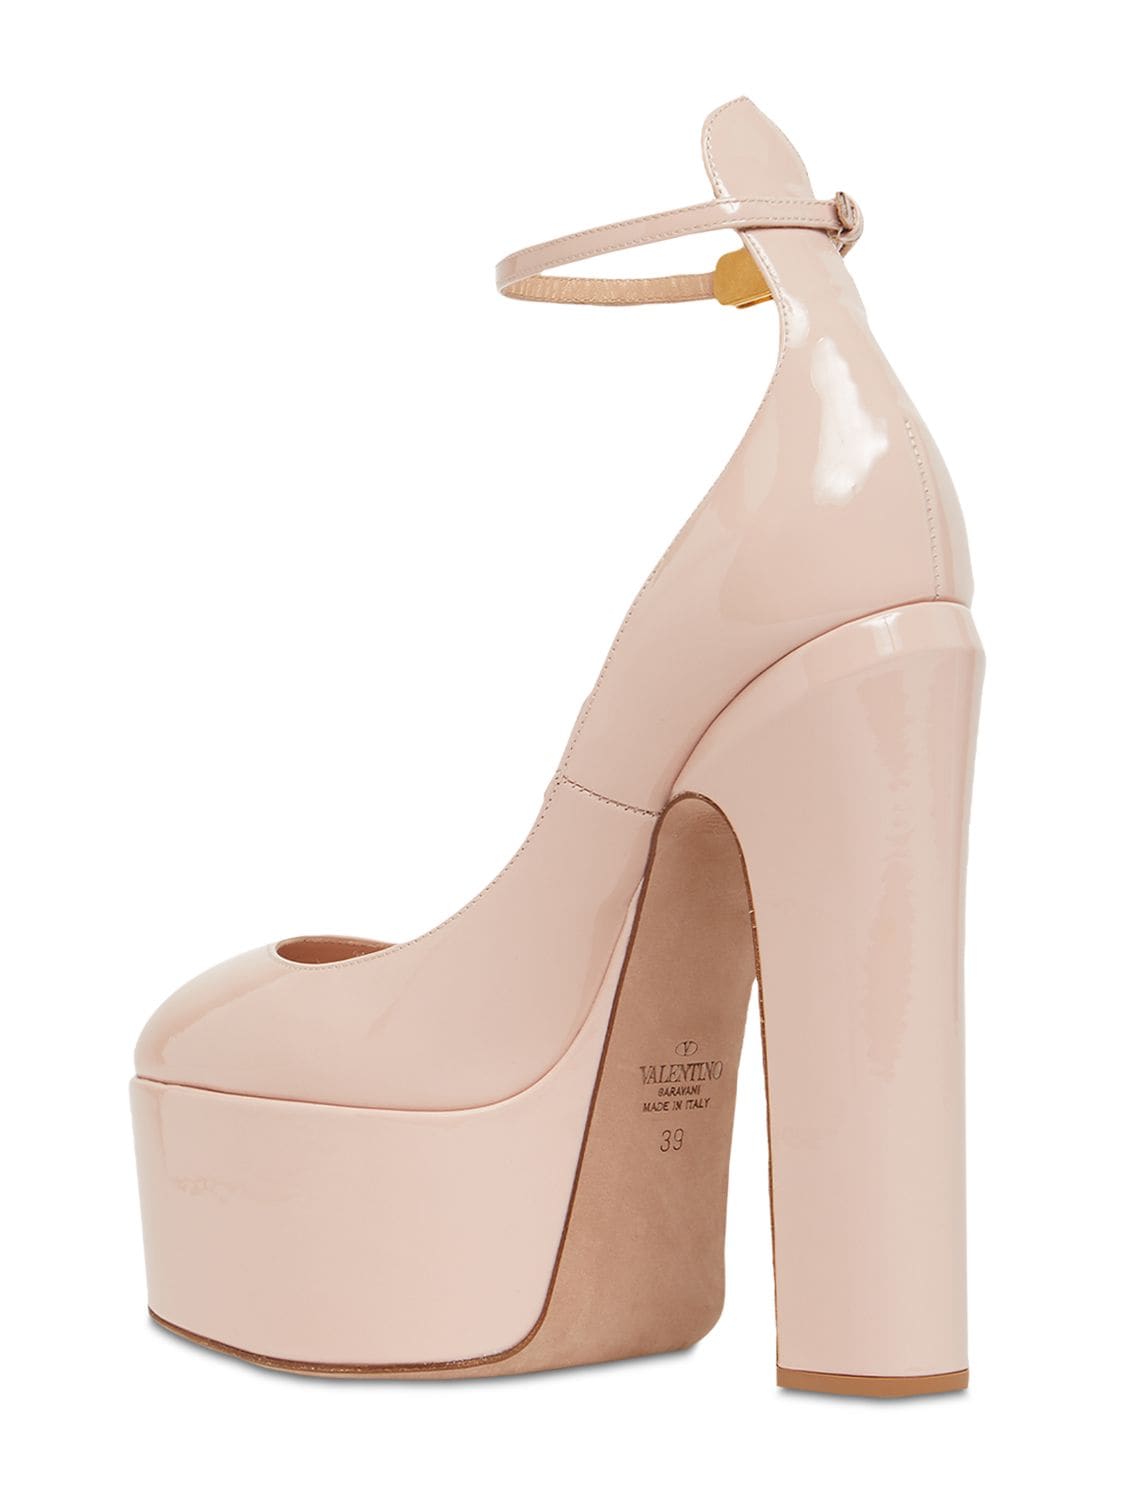 Shop Valentino 155mm Tango Patent Leather Pumps In Blush